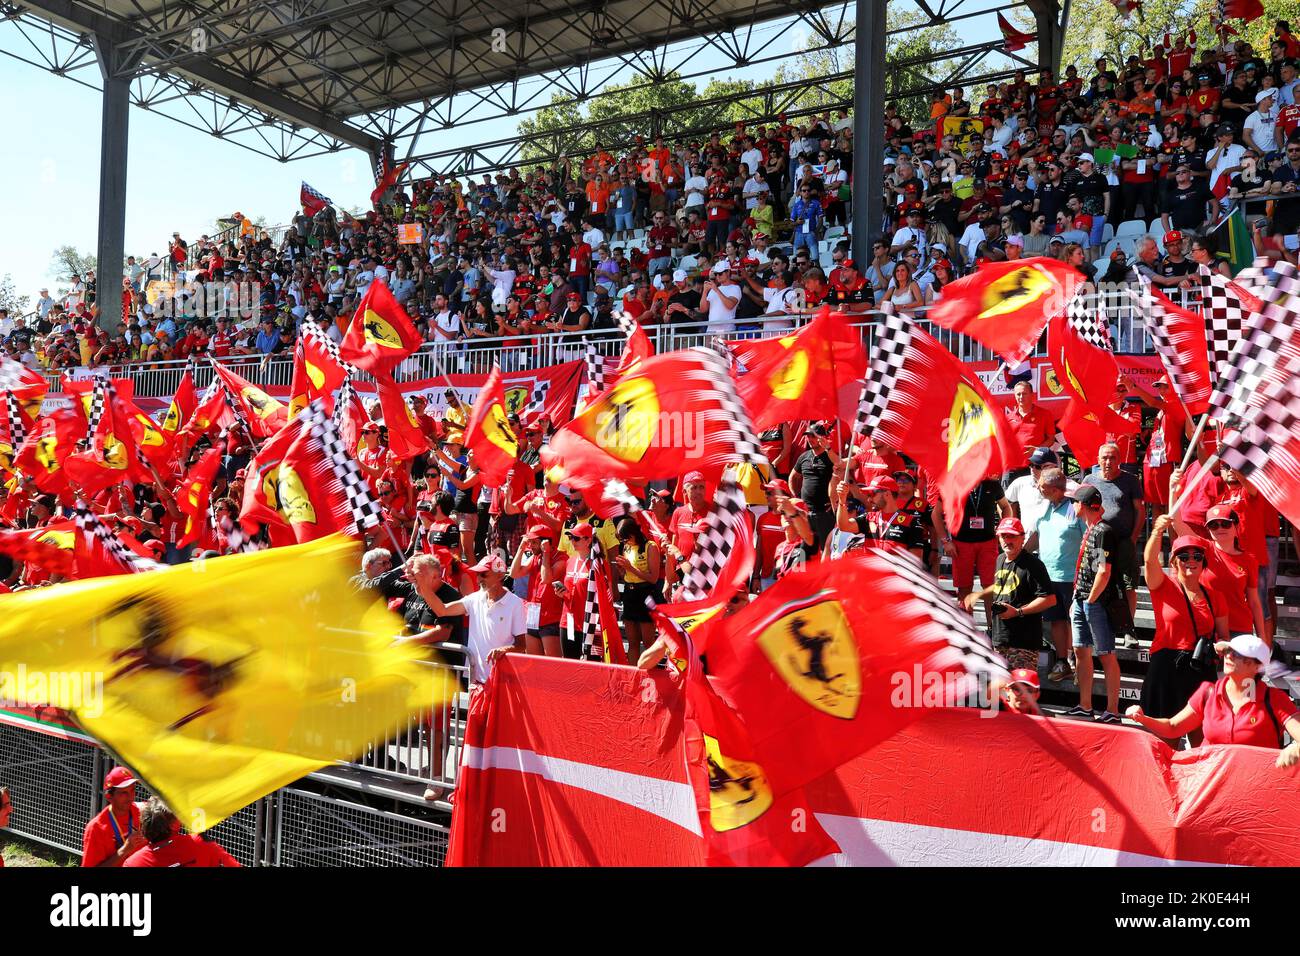 Monza, Italy. 11th Sep, 2022. Circuit atmosphere - Ferrari fans in the grandstand. Italian Grand Prix, Sunday 11th September 2022. Monza Italy. Credit: James Moy/Alamy Live News Credit: James Moy/Alamy Live News Stock Photo